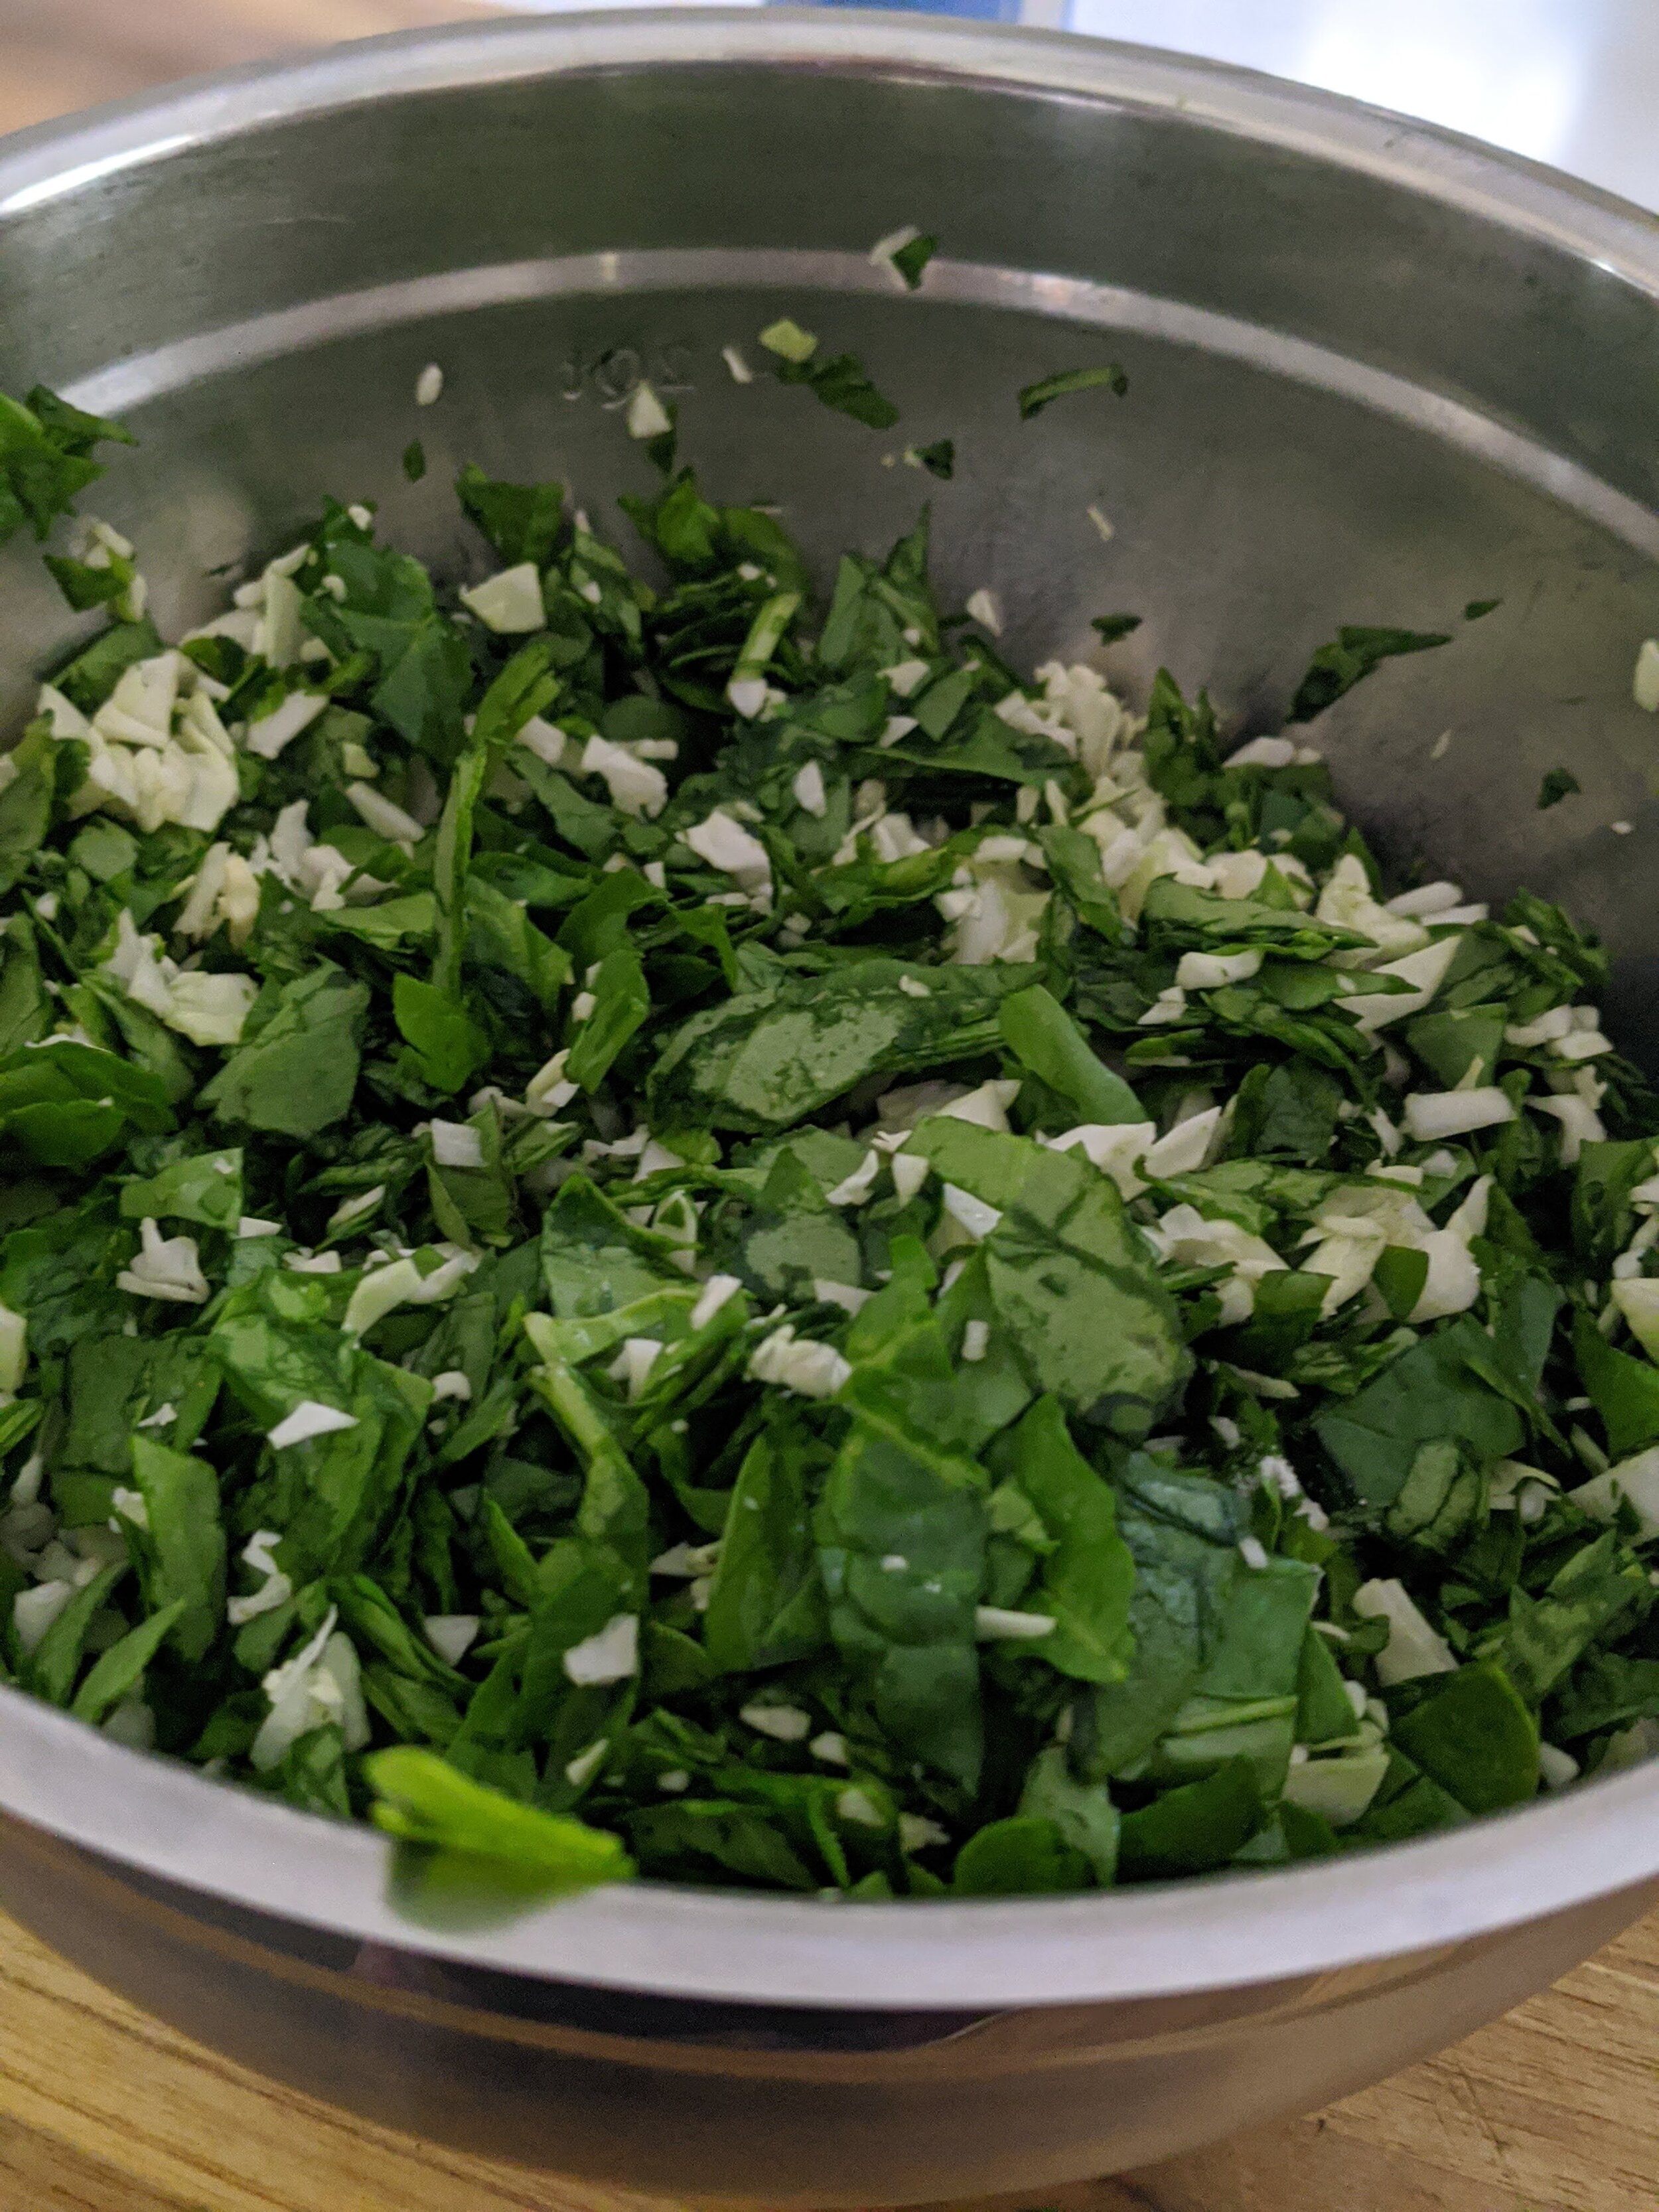 Cut cabbage and spinach - 1 cup each